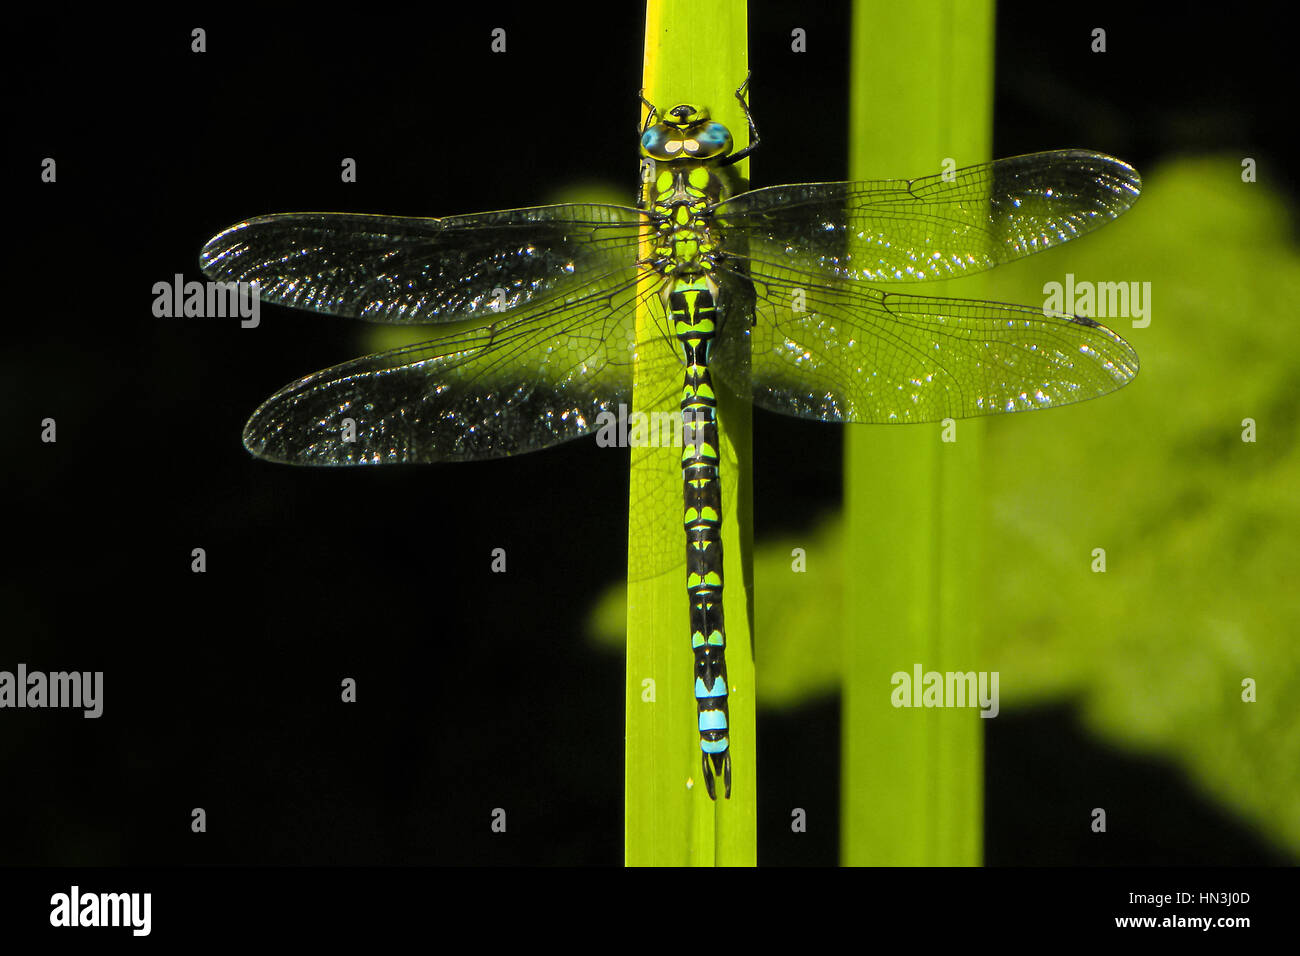 Southern Hawker dragonfly, Aeschna cyanea, resting on a green leaf with wings extended Stock Photo